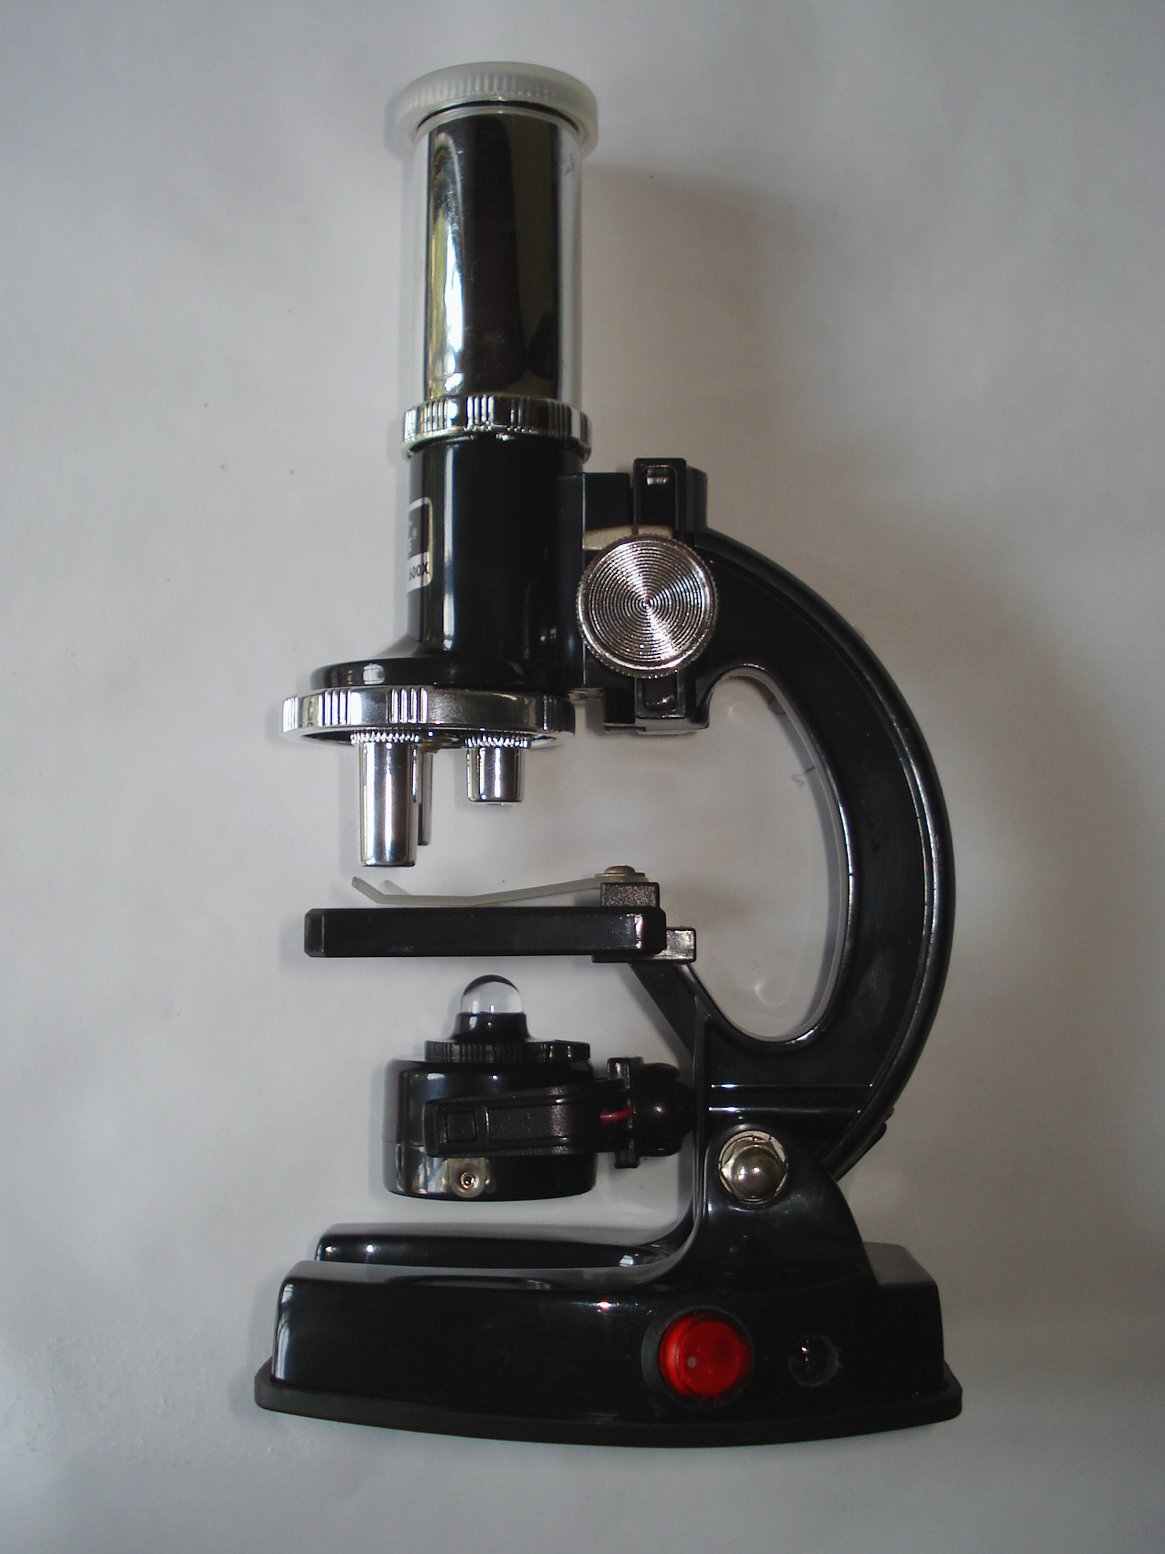 a microscope and other tools sit on a white surface